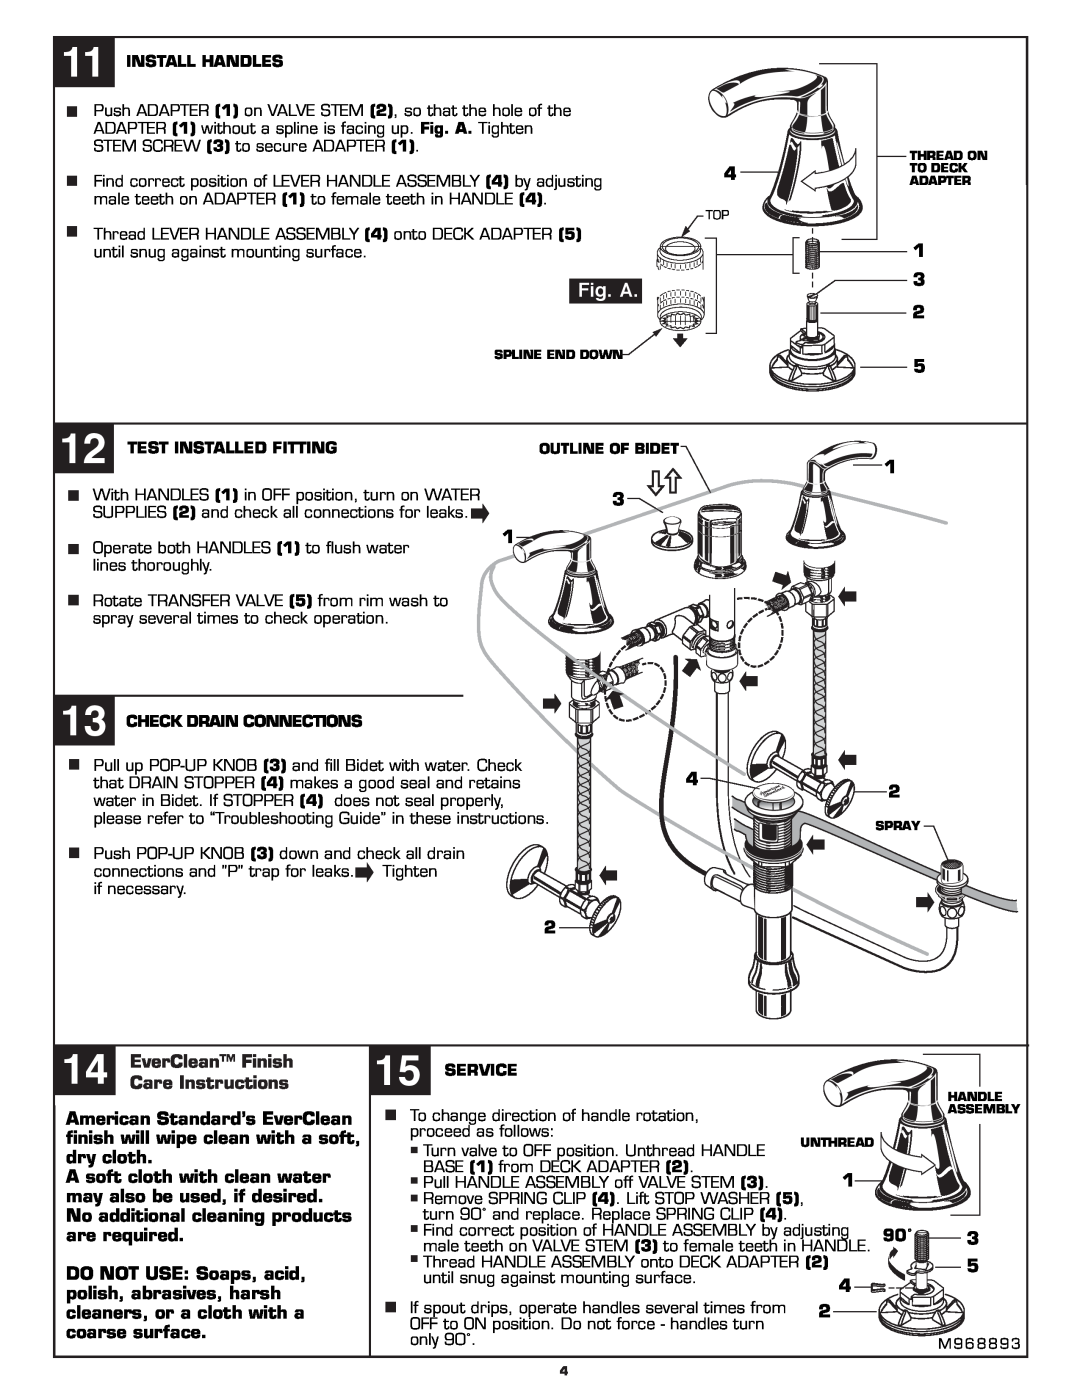 American Standard 7038.400 installation instructions Fig. A, 14EverClean Finish Care Instructions 